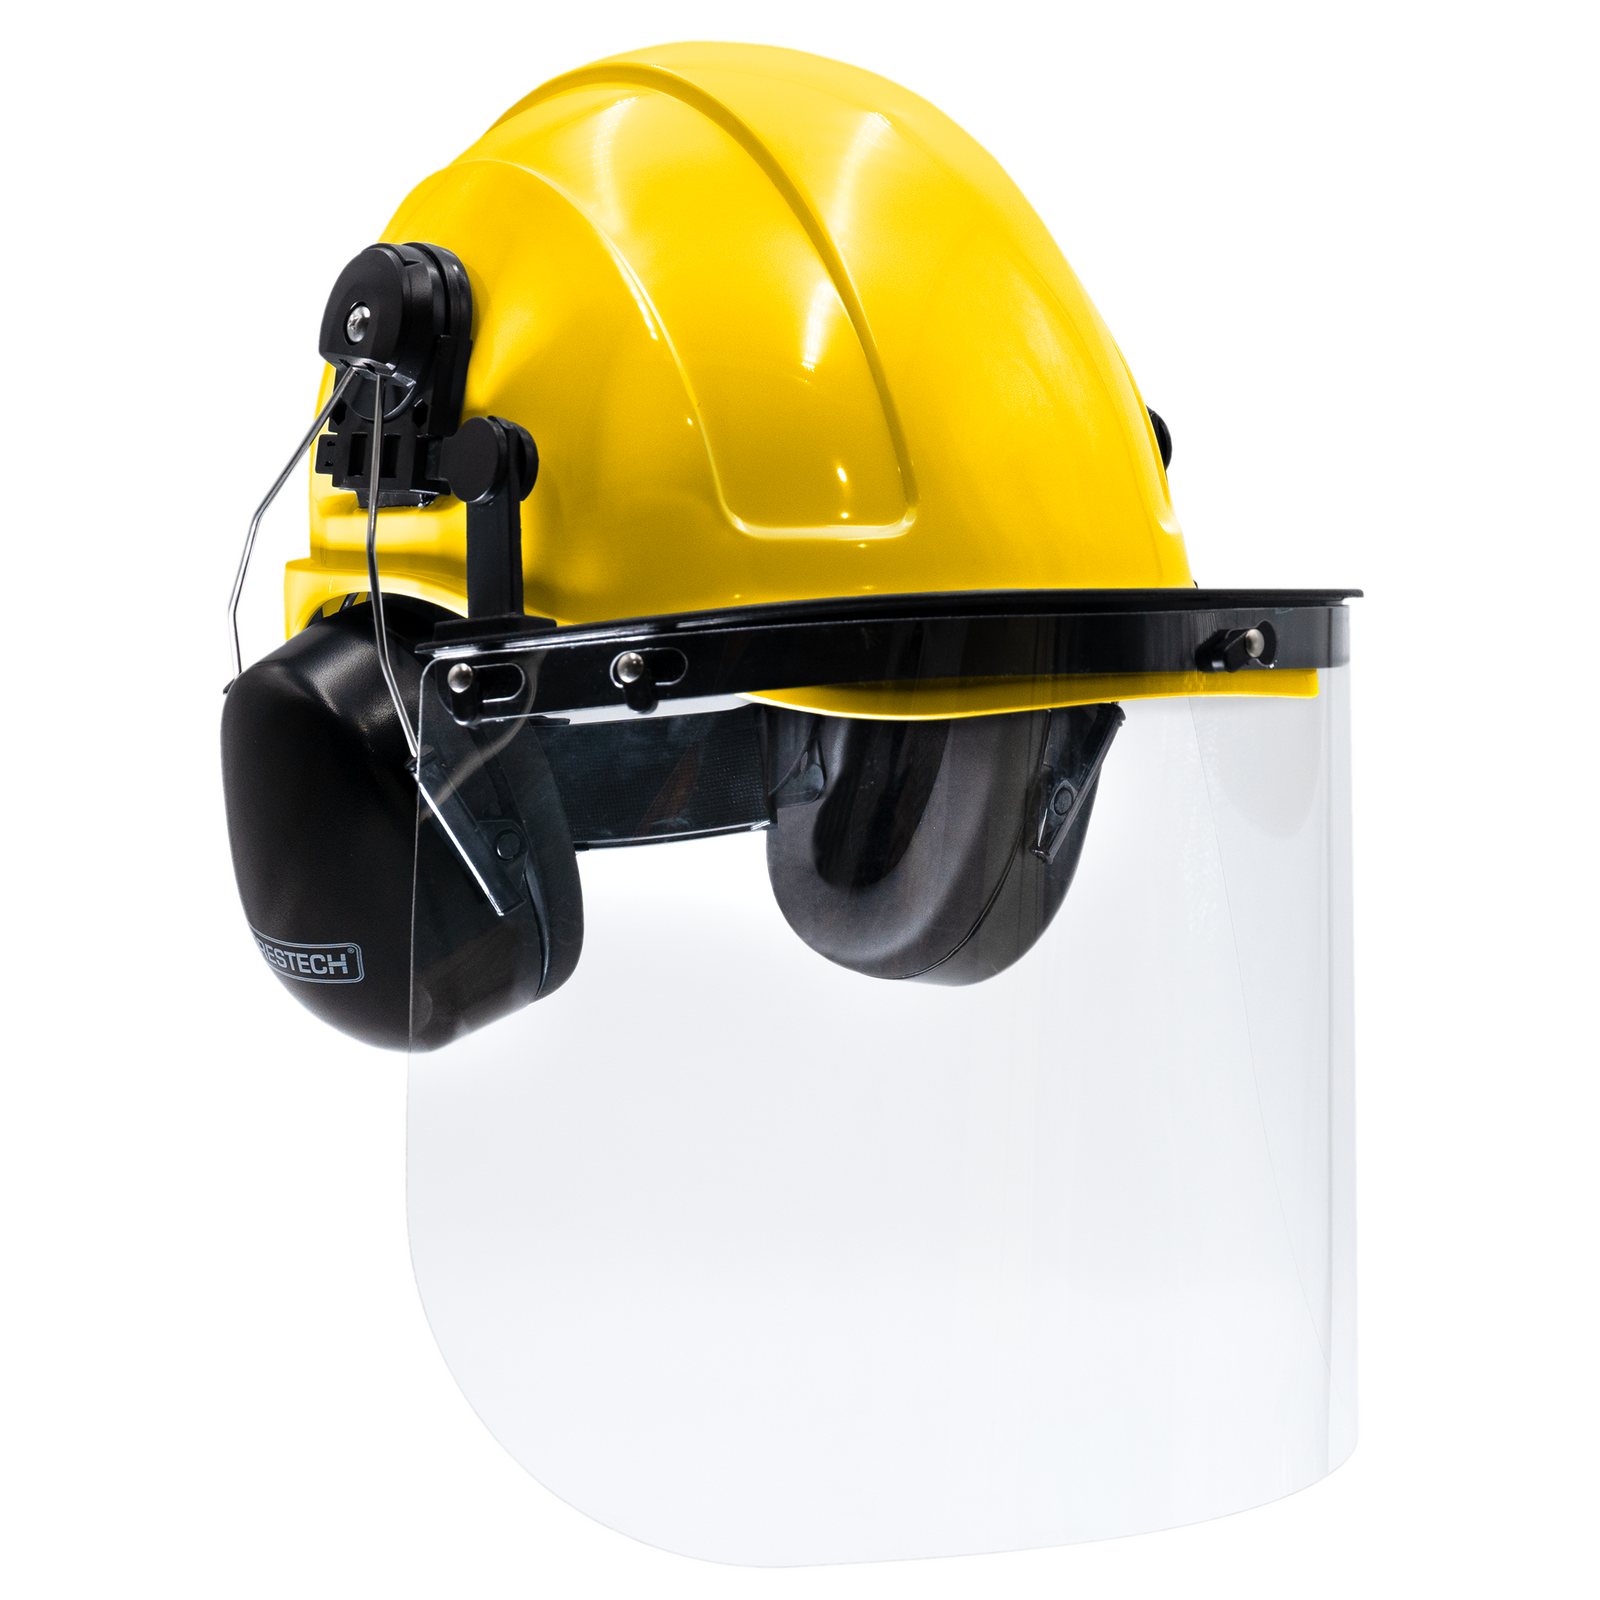 Yellow cap style hard hat kit with mountable earmuffs and hi-transparency face shield